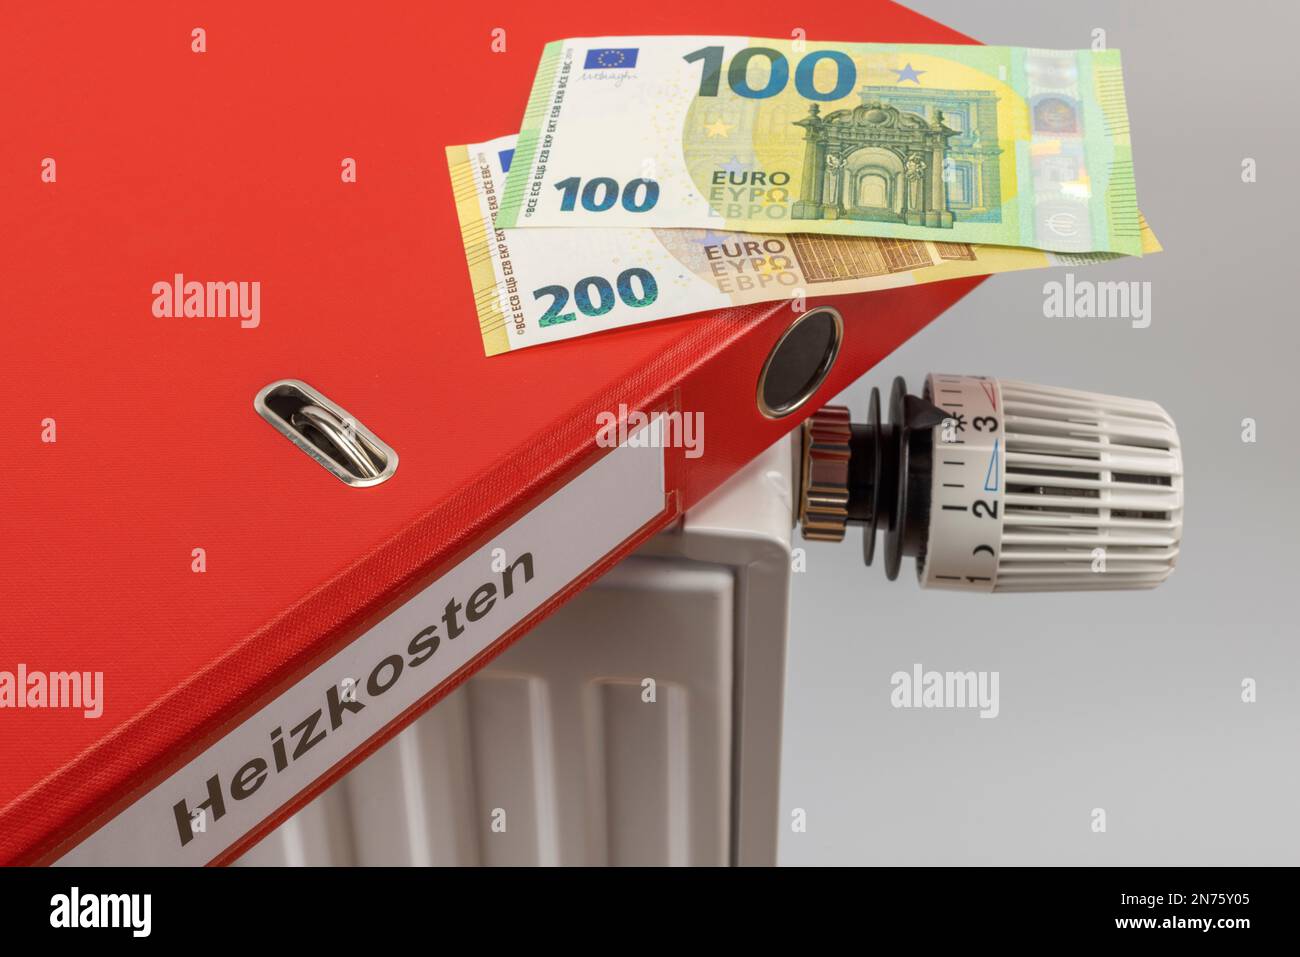 Red file folder with label heating costs, euro bills lie on radiator, symbol image, 300 euro energy flat rate, energy costs, rising heating costs, white background, Stock Photo